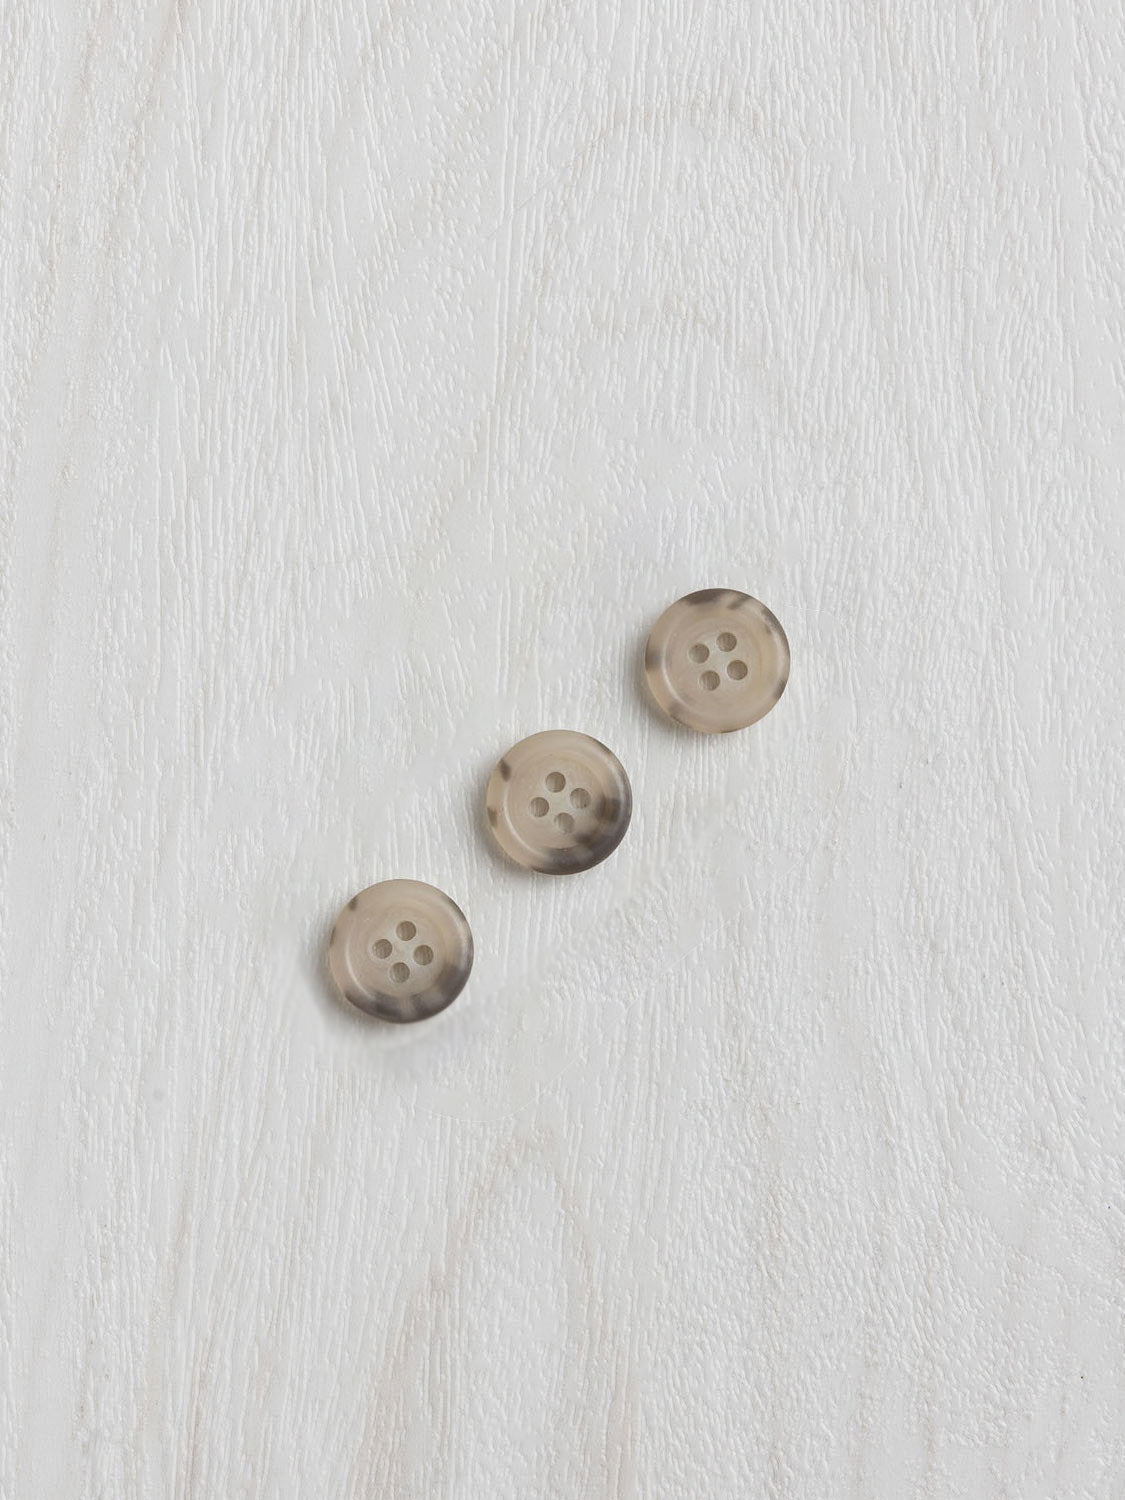 Recycled-Paper-Buttons-16mm-Grey-3PK_LR.jpg